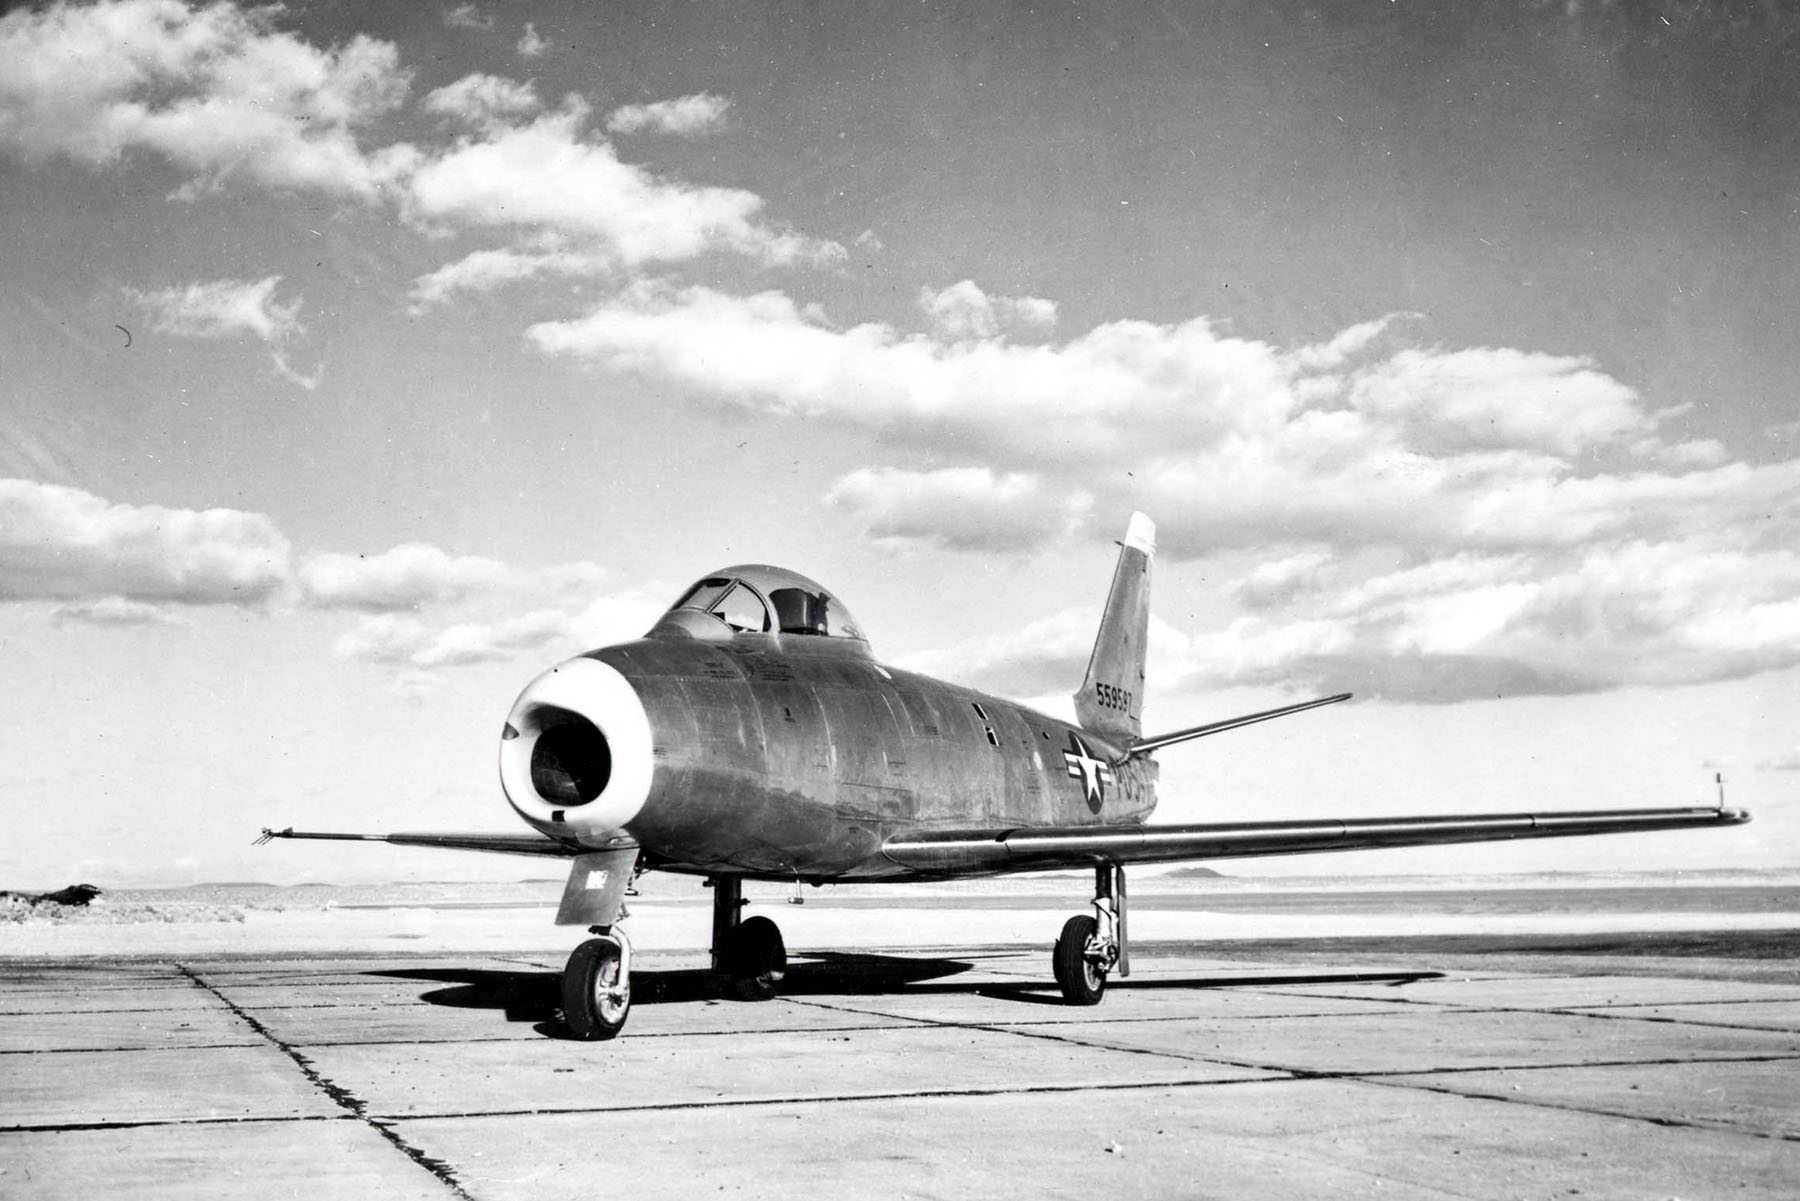 North American Aviation Model NA-140, the first XP-86 prototype, 45-59597, at Muroc AAF, 1947. (U.S. Air Force)